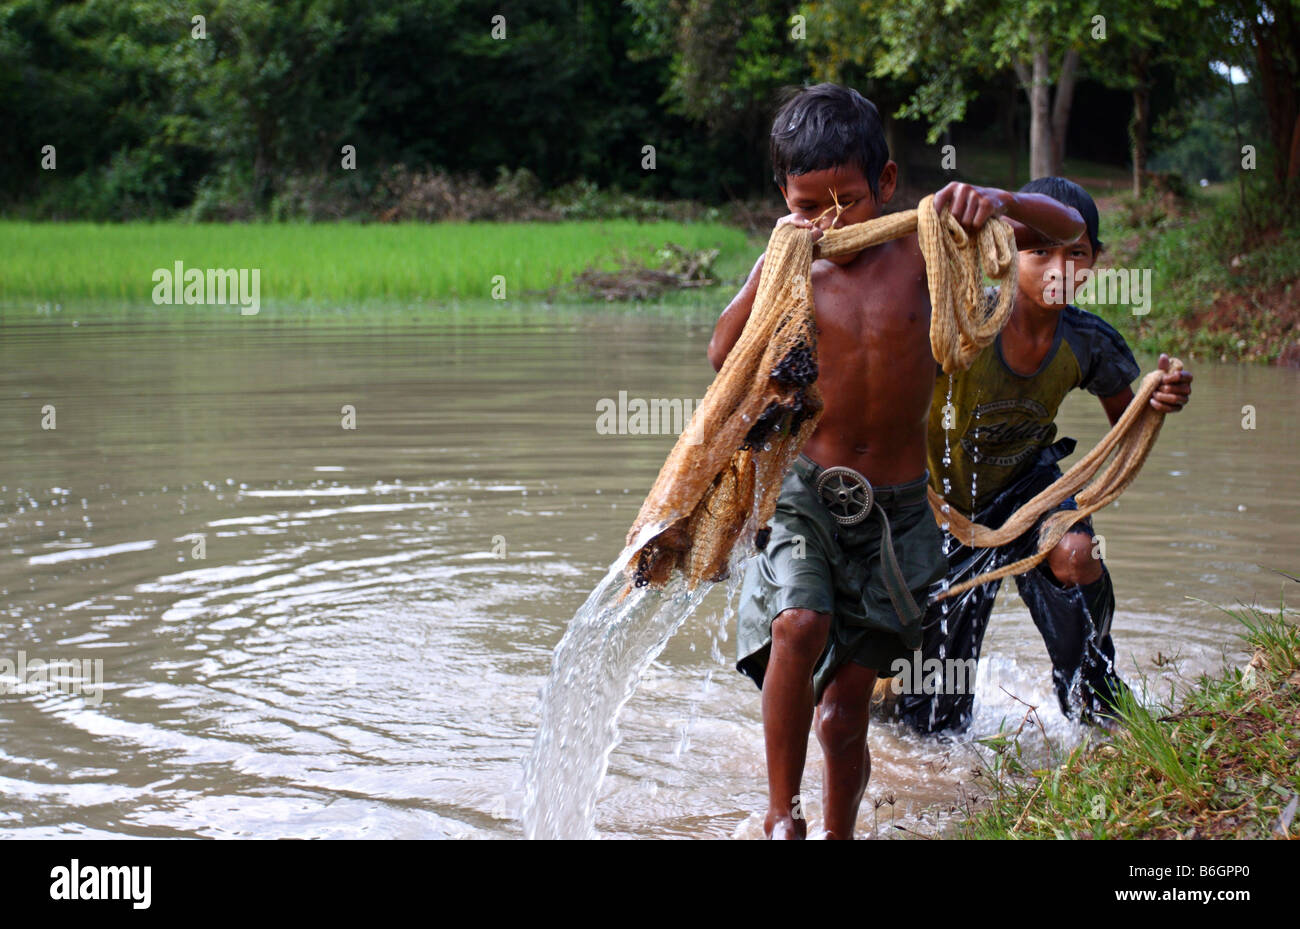 Local young kids fishing casting a net in a pond in the